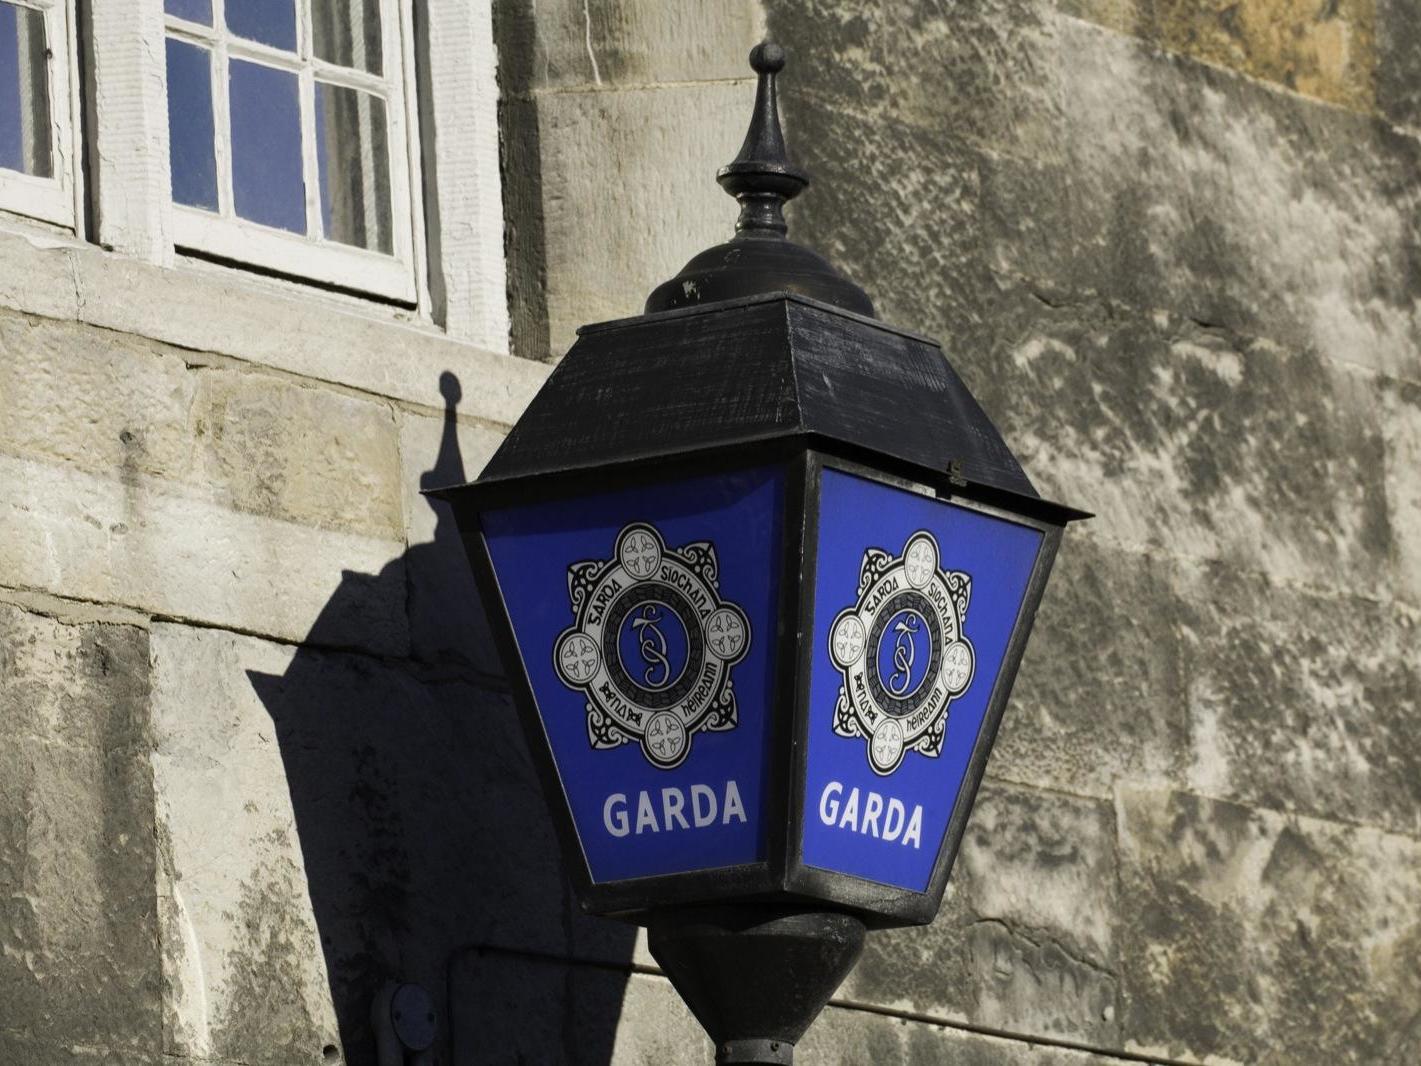 The injured Garda member is in his late 20s and being treated for head, facial and leg injuries